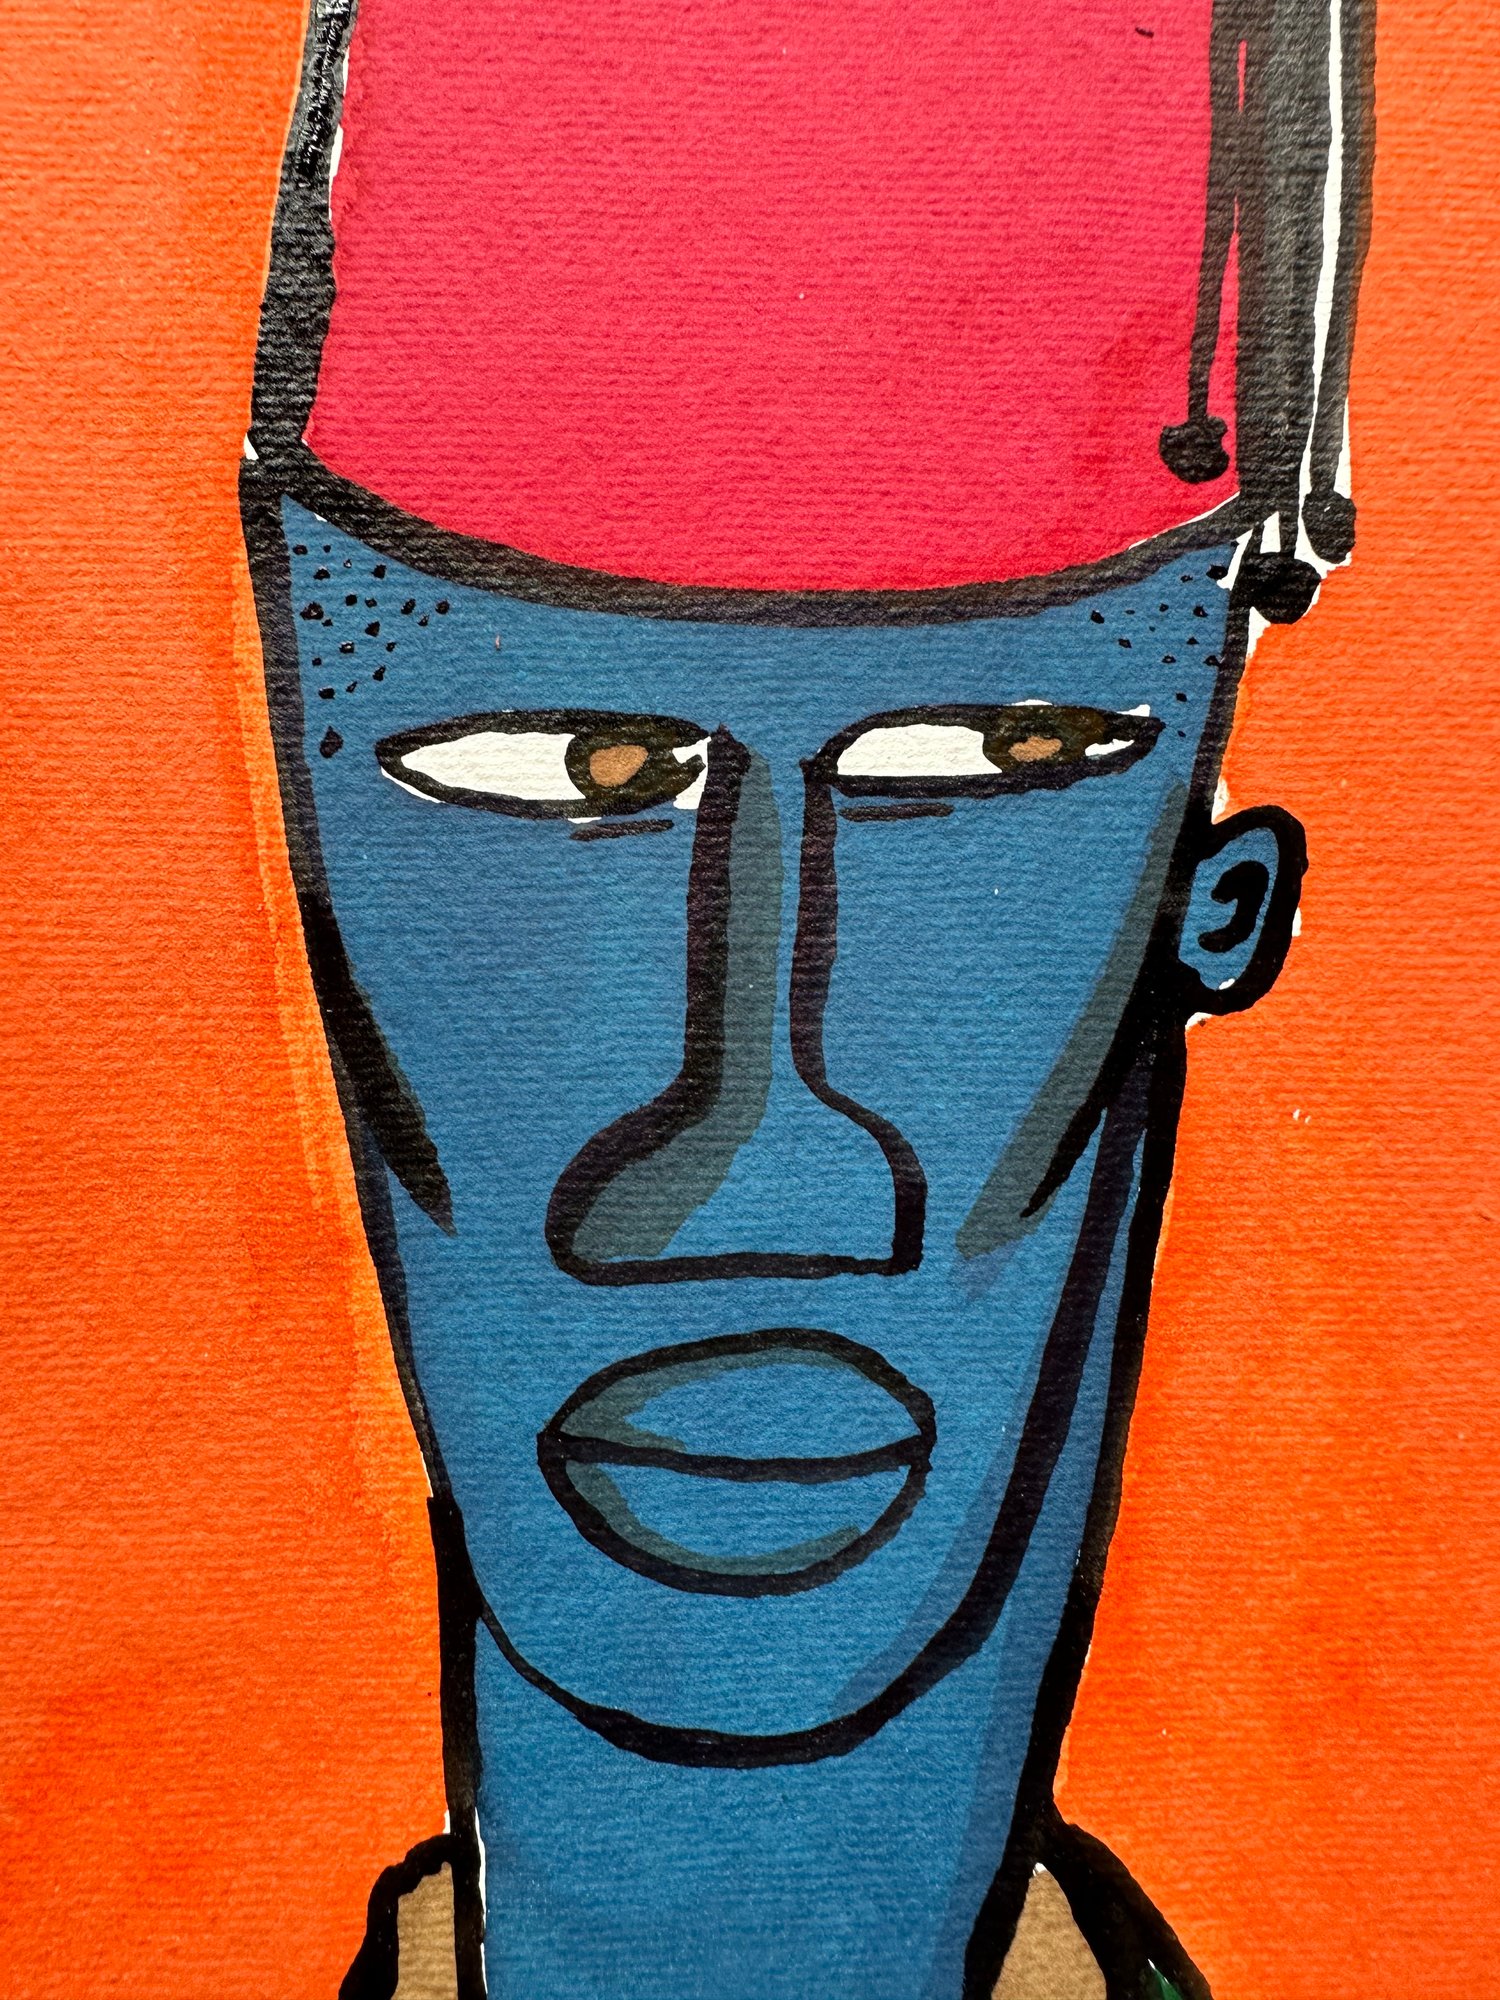 Image of 'Boy in Red Fez' by STEPHEN ANTHONY DAVIDS